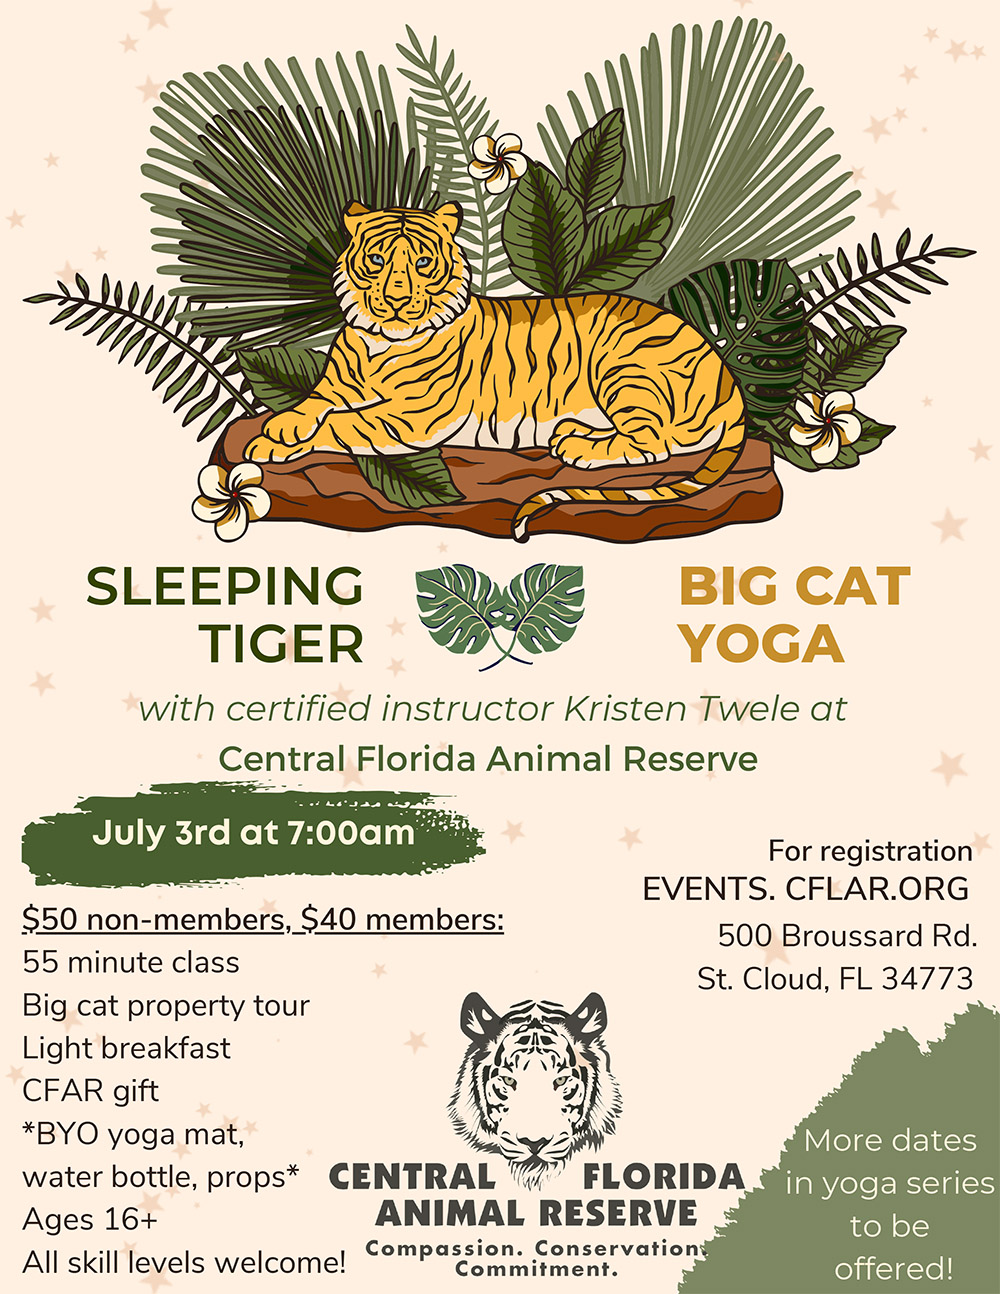 Get ready to say namaste to lions, tiger, leopards and cougars at Central Florida Animal Reserve’s Sleeping Tiger Big Cat Yoga! July 3rd at 7:00am!